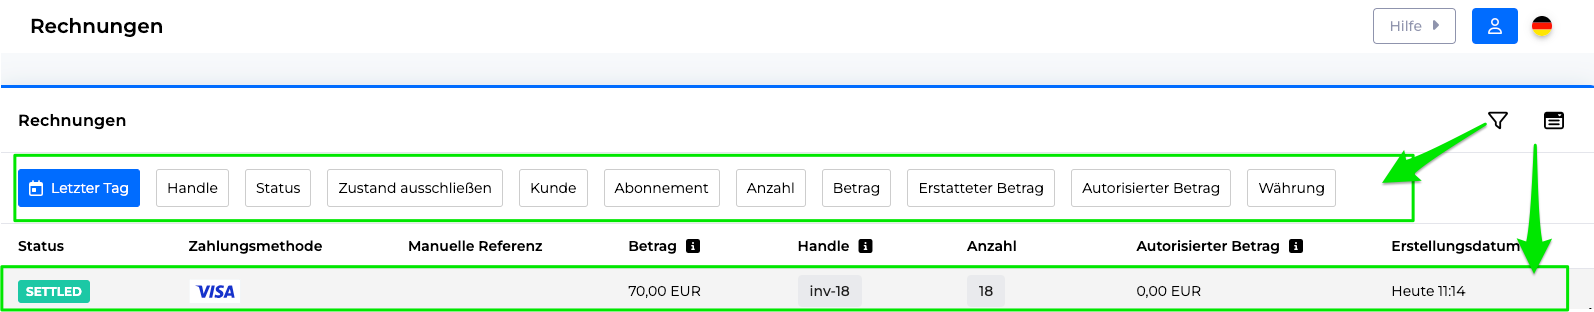 Filter-Invoice-Search1.png